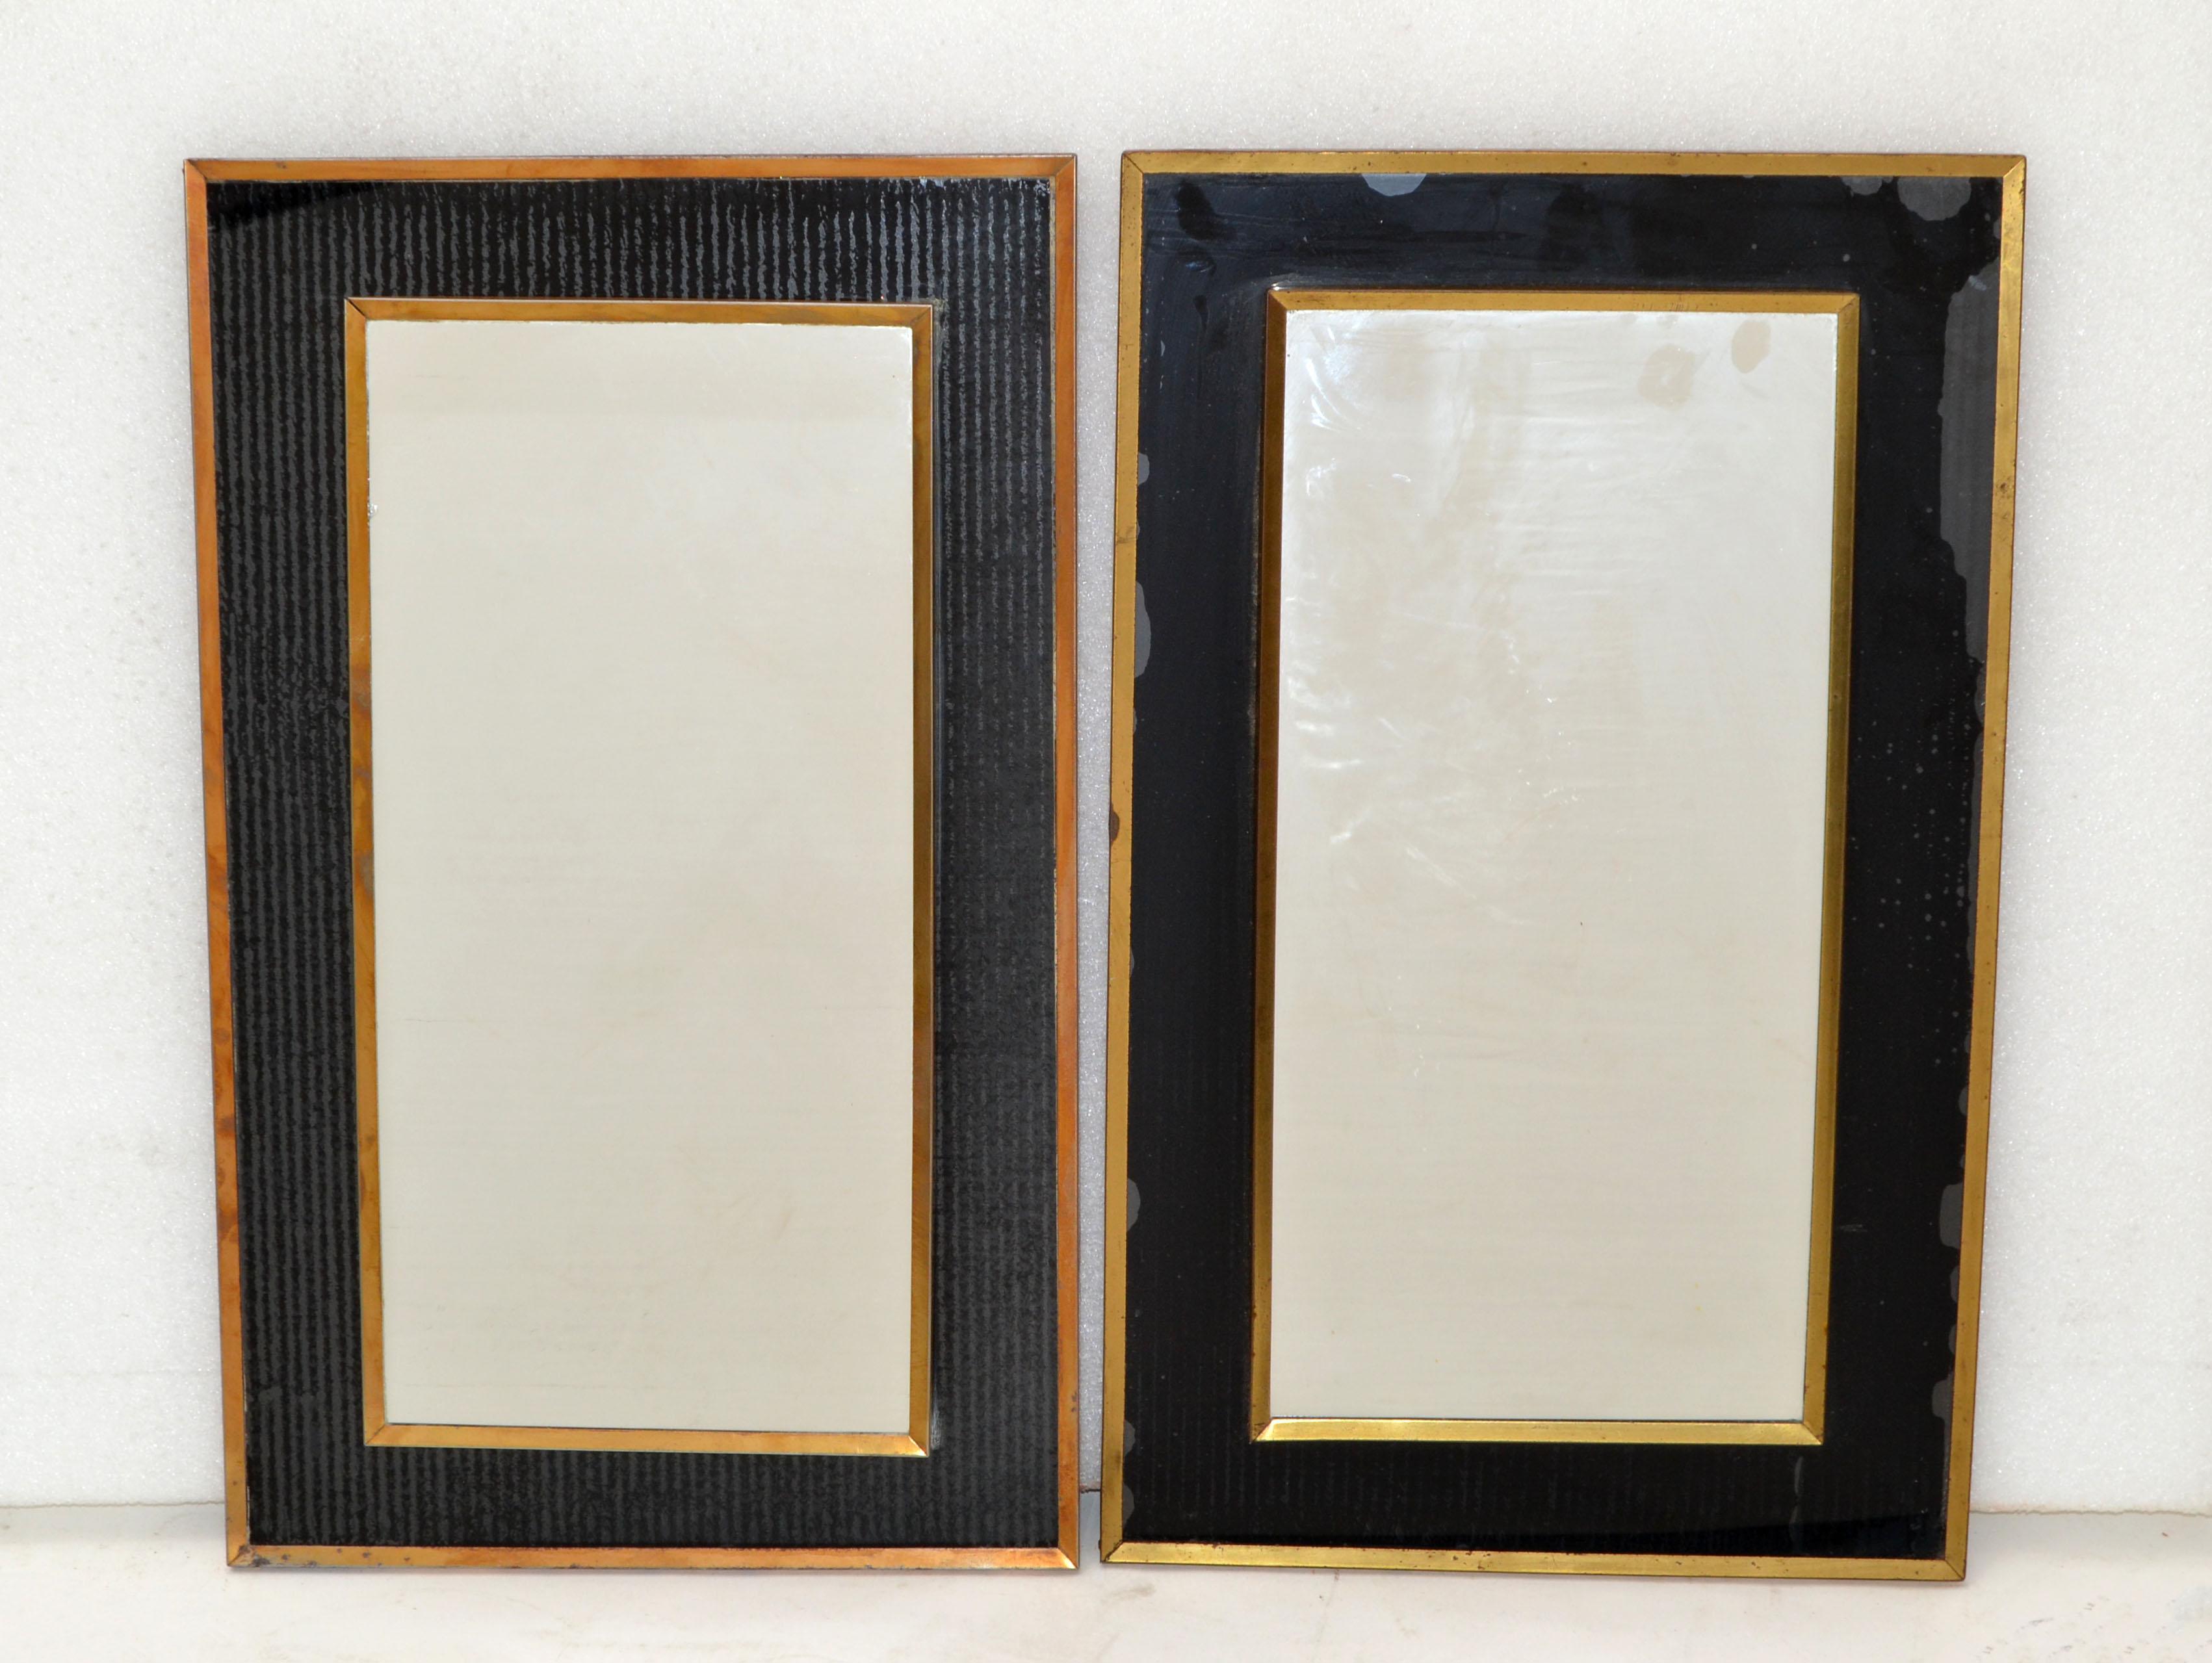 Pair of small mirror in the style of Jacques Adnet, brass finished and black opaline frame.
Mirror measures: 19.5 inches height x 9.5 inches width.
Can be hung horizontal or vertical.